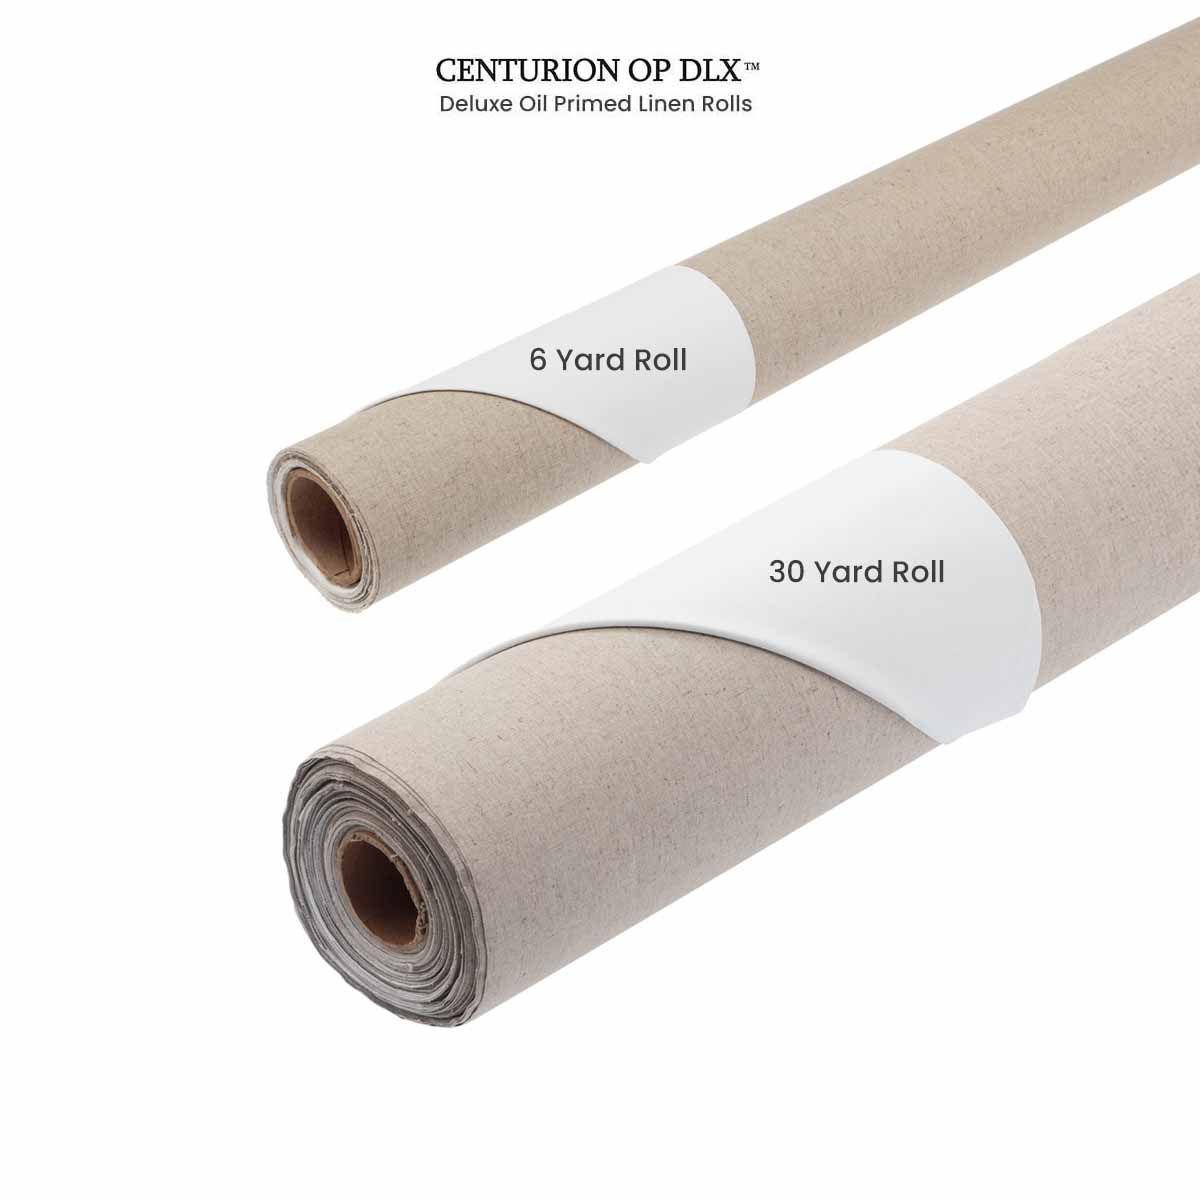 Centurion Deluxe Professional Oil Primed 6 And 30 Yard Linen Canvas Rolls (OP DLX)